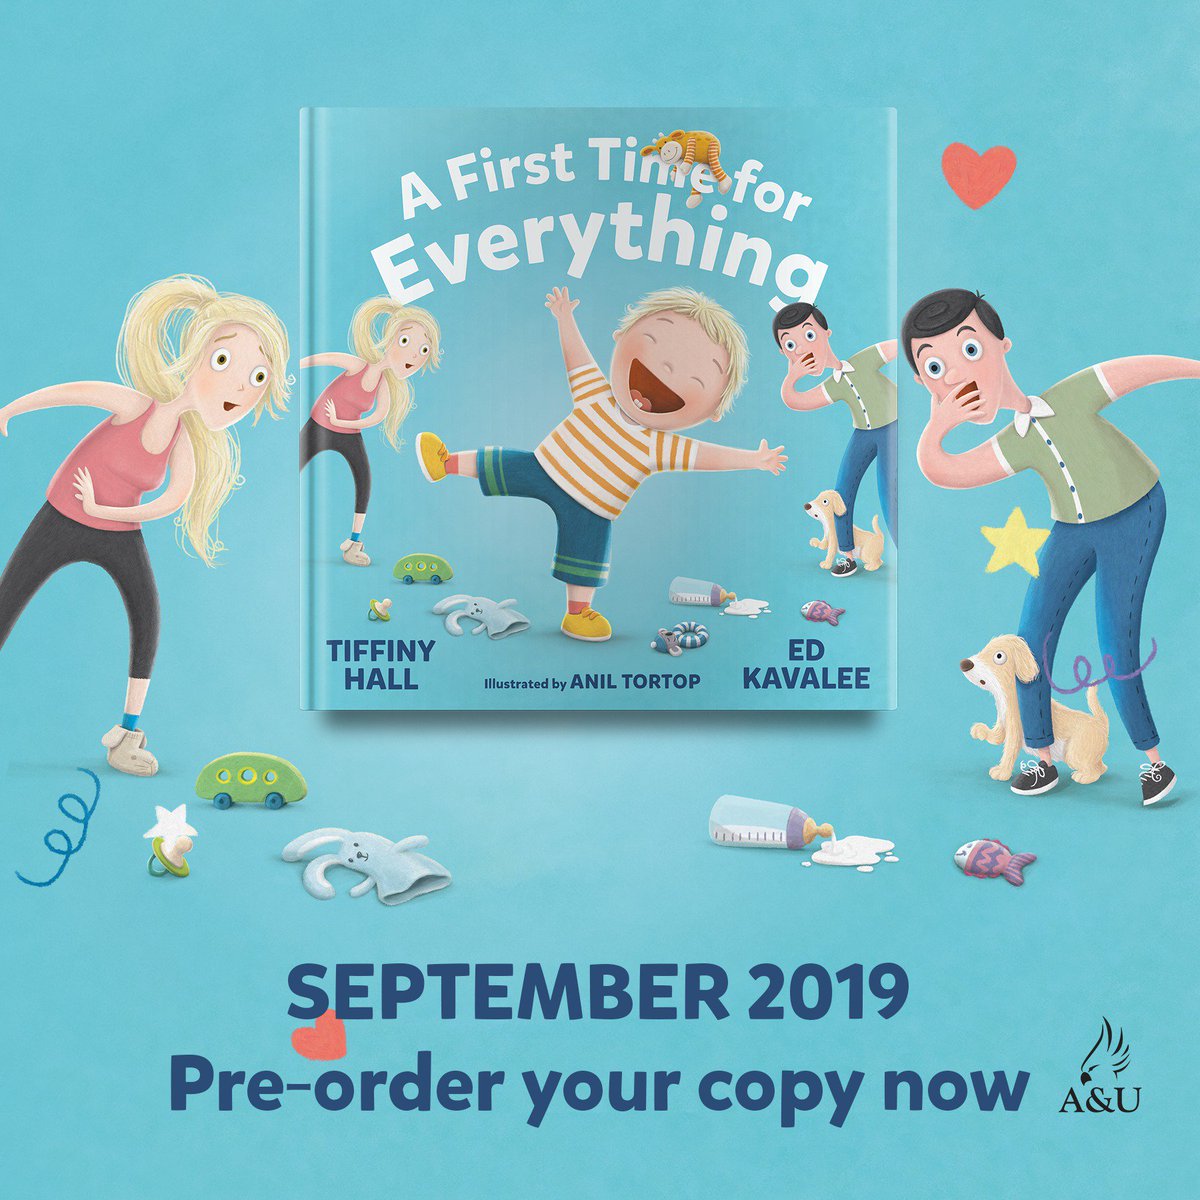 Ed and I have a massive announcement...we wrote a book! 📚 Since we had Arnold we've learnt so much that we wanted to share, so we've put it all down on paper for you, and called it A First Time for Everything. You can pre-order it here now: bit.ly/2VKQRB6